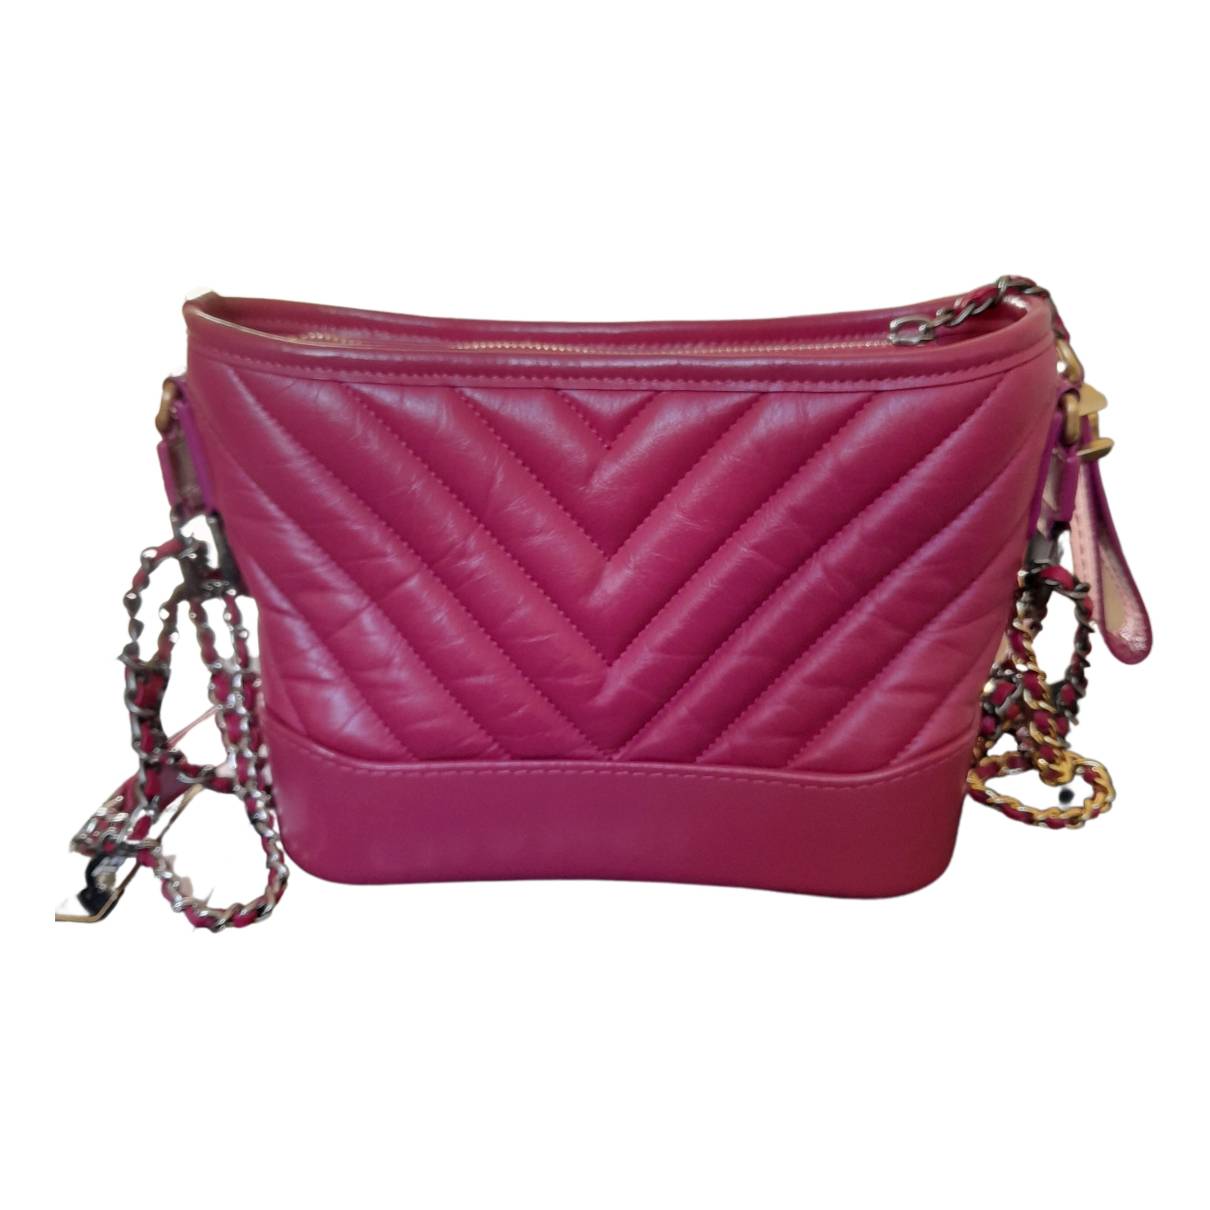 Gabrielle leather handbag Chanel Pink in Leather - 31658595